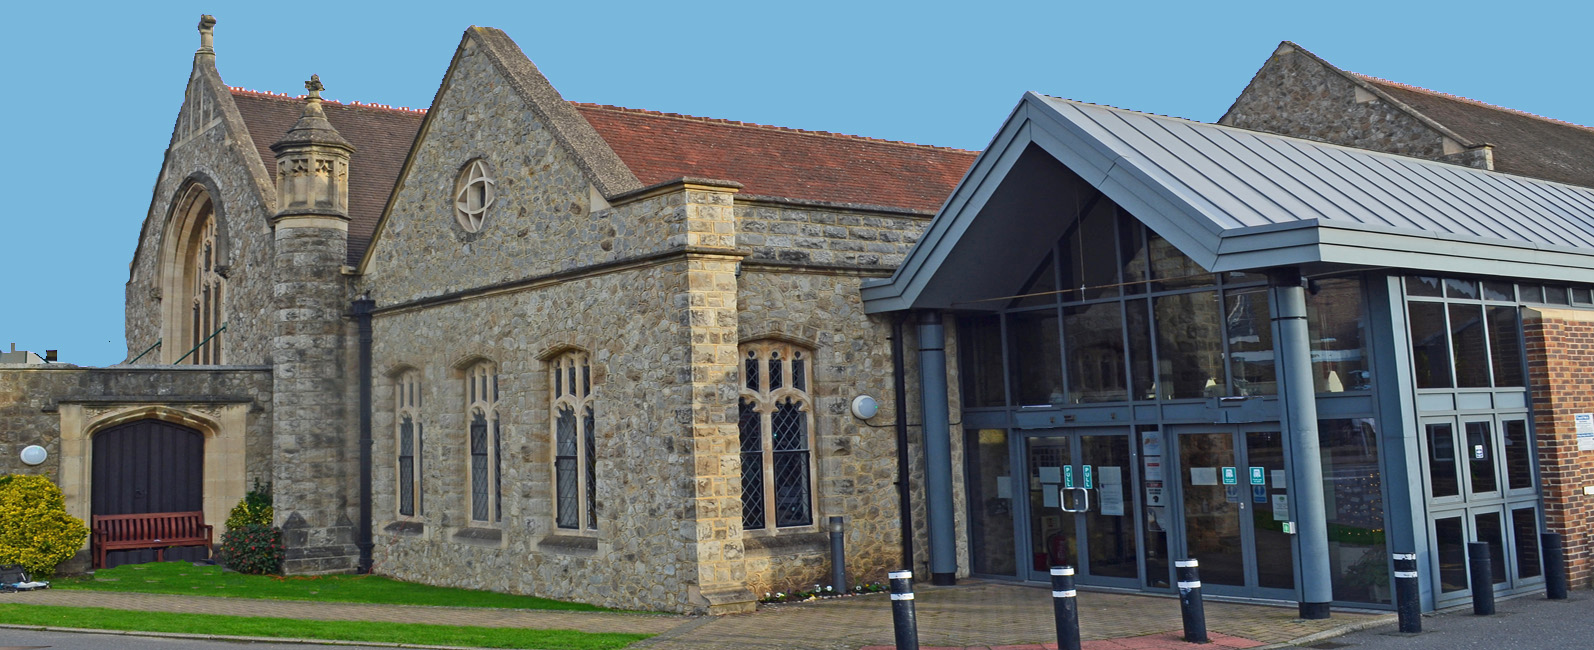 WELCOME*The Town Centre Church for all in Epsom*I'm New